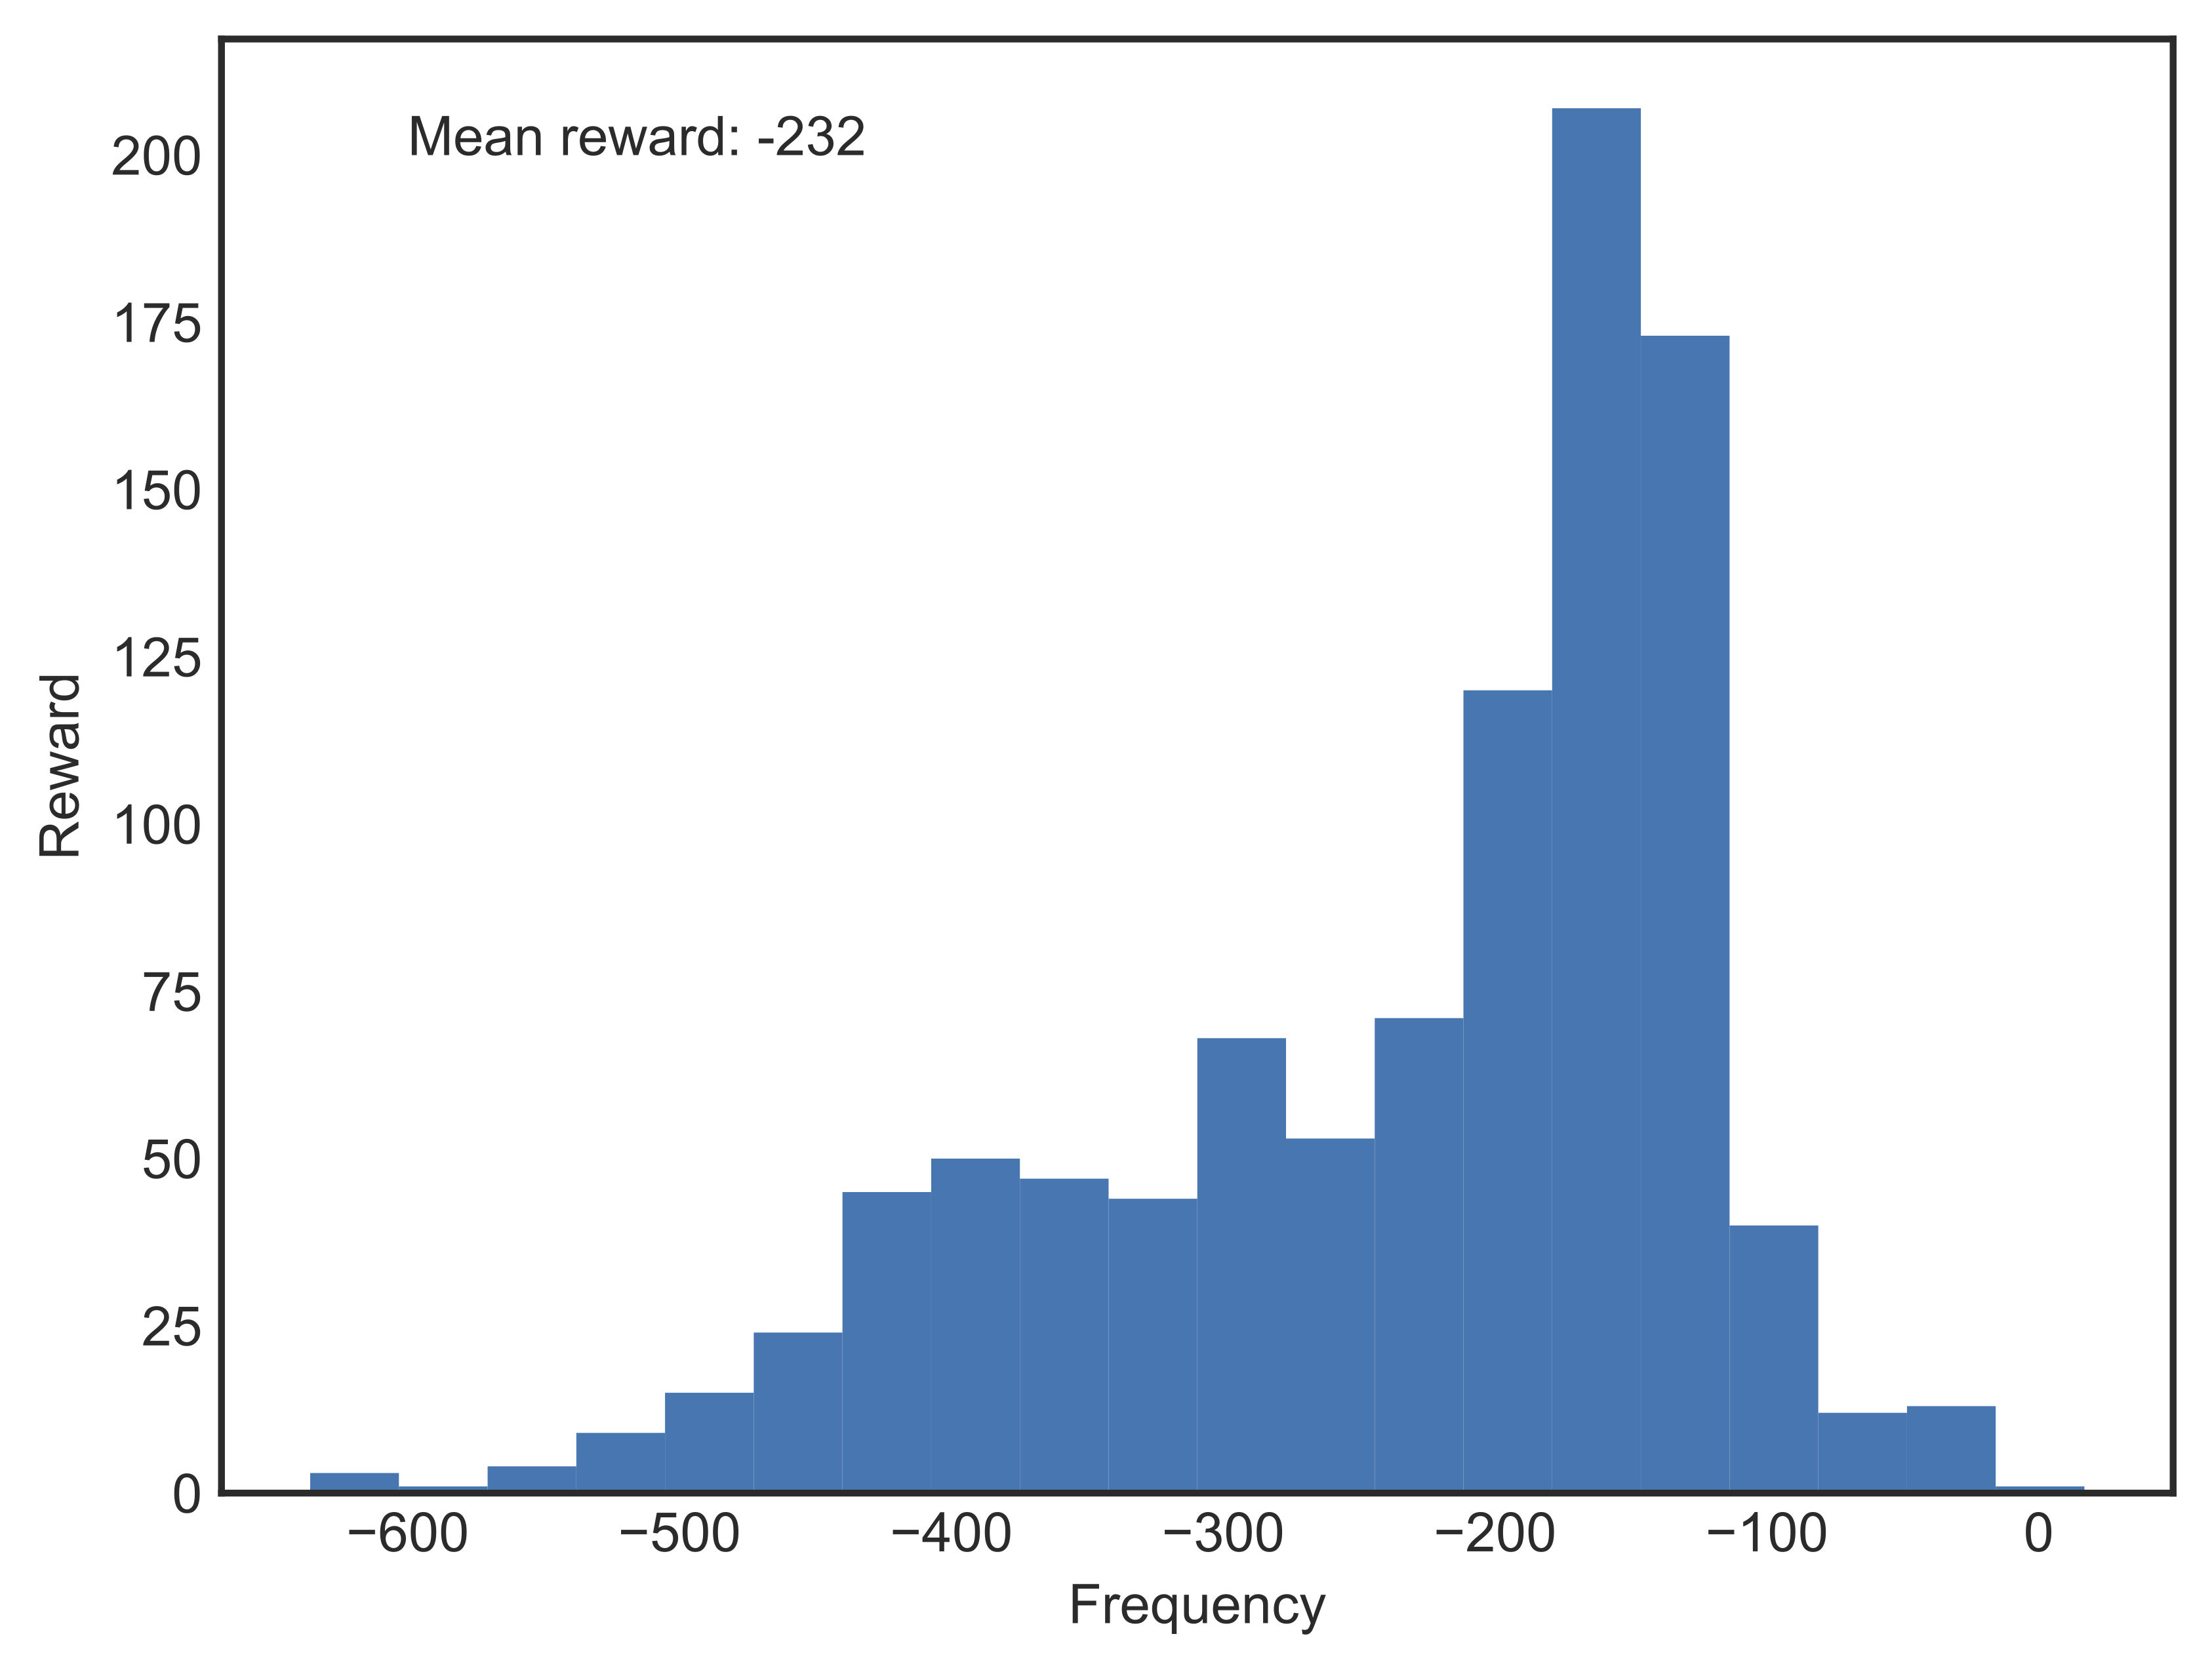 Rewards over 1000 episodes conducted by a random agent.<span data-label="fig:randagentreward"></span>